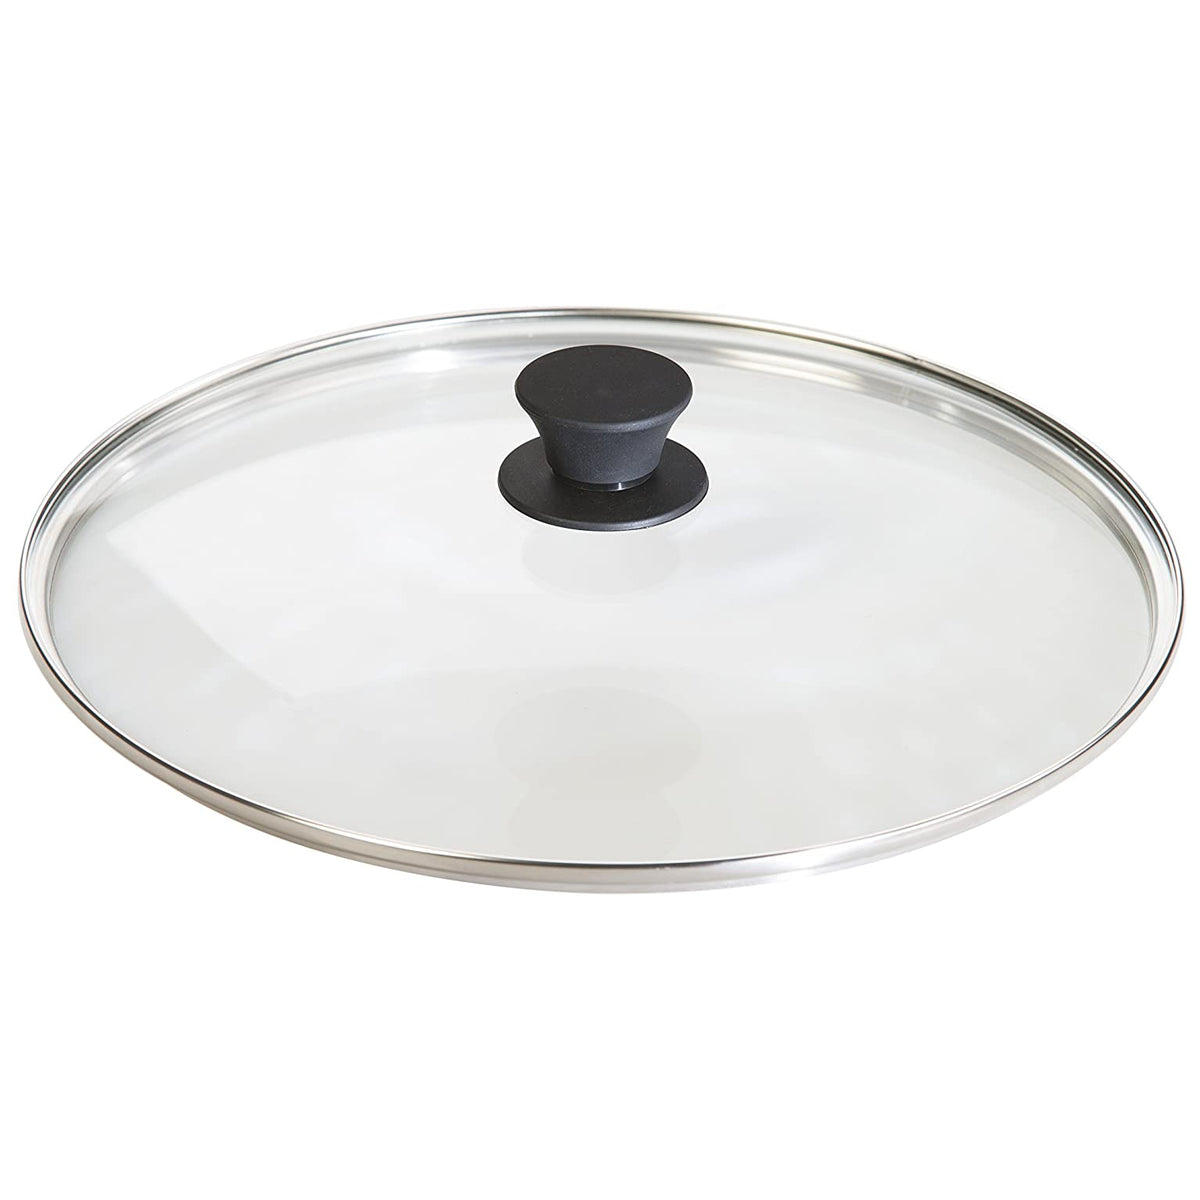 Lodge GL12 Tempered Safety Glass Lid Cover, 12"